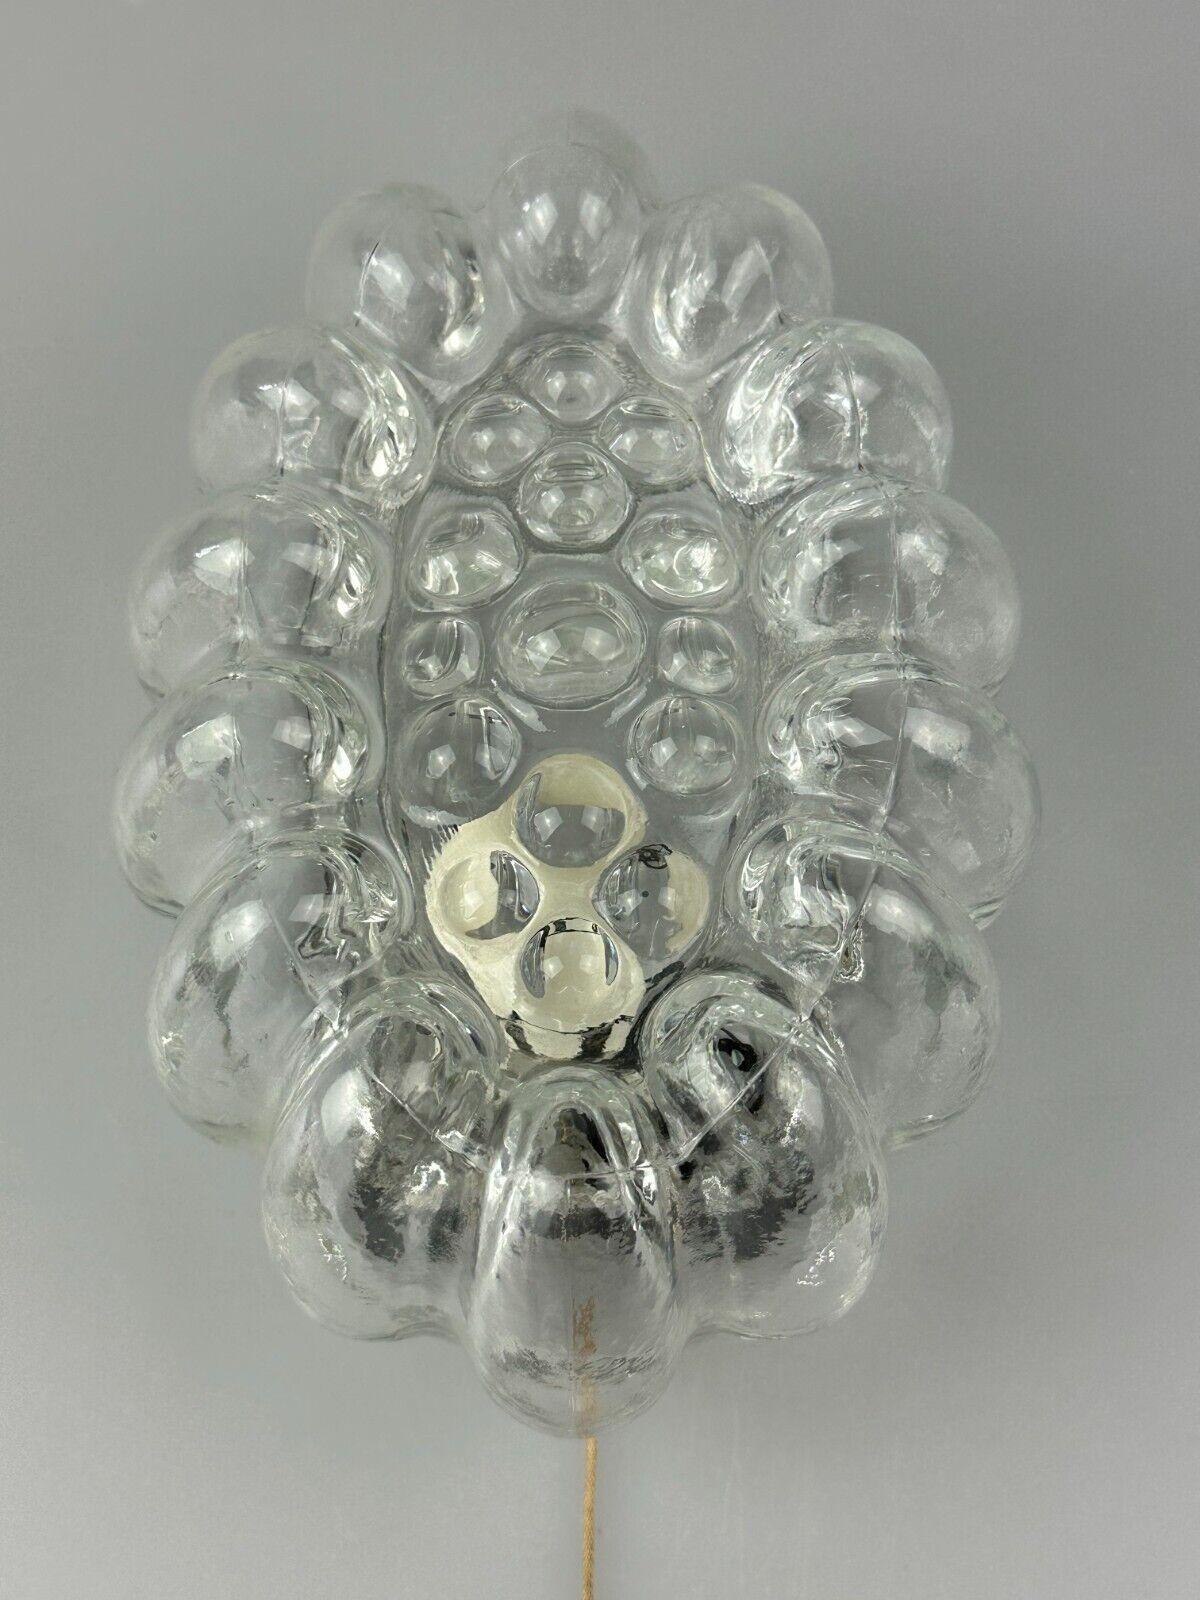 60s 70s wall lamp made of glass & metal bubble wall sconce space age design In Good Condition For Sale In Neuenkirchen, NI